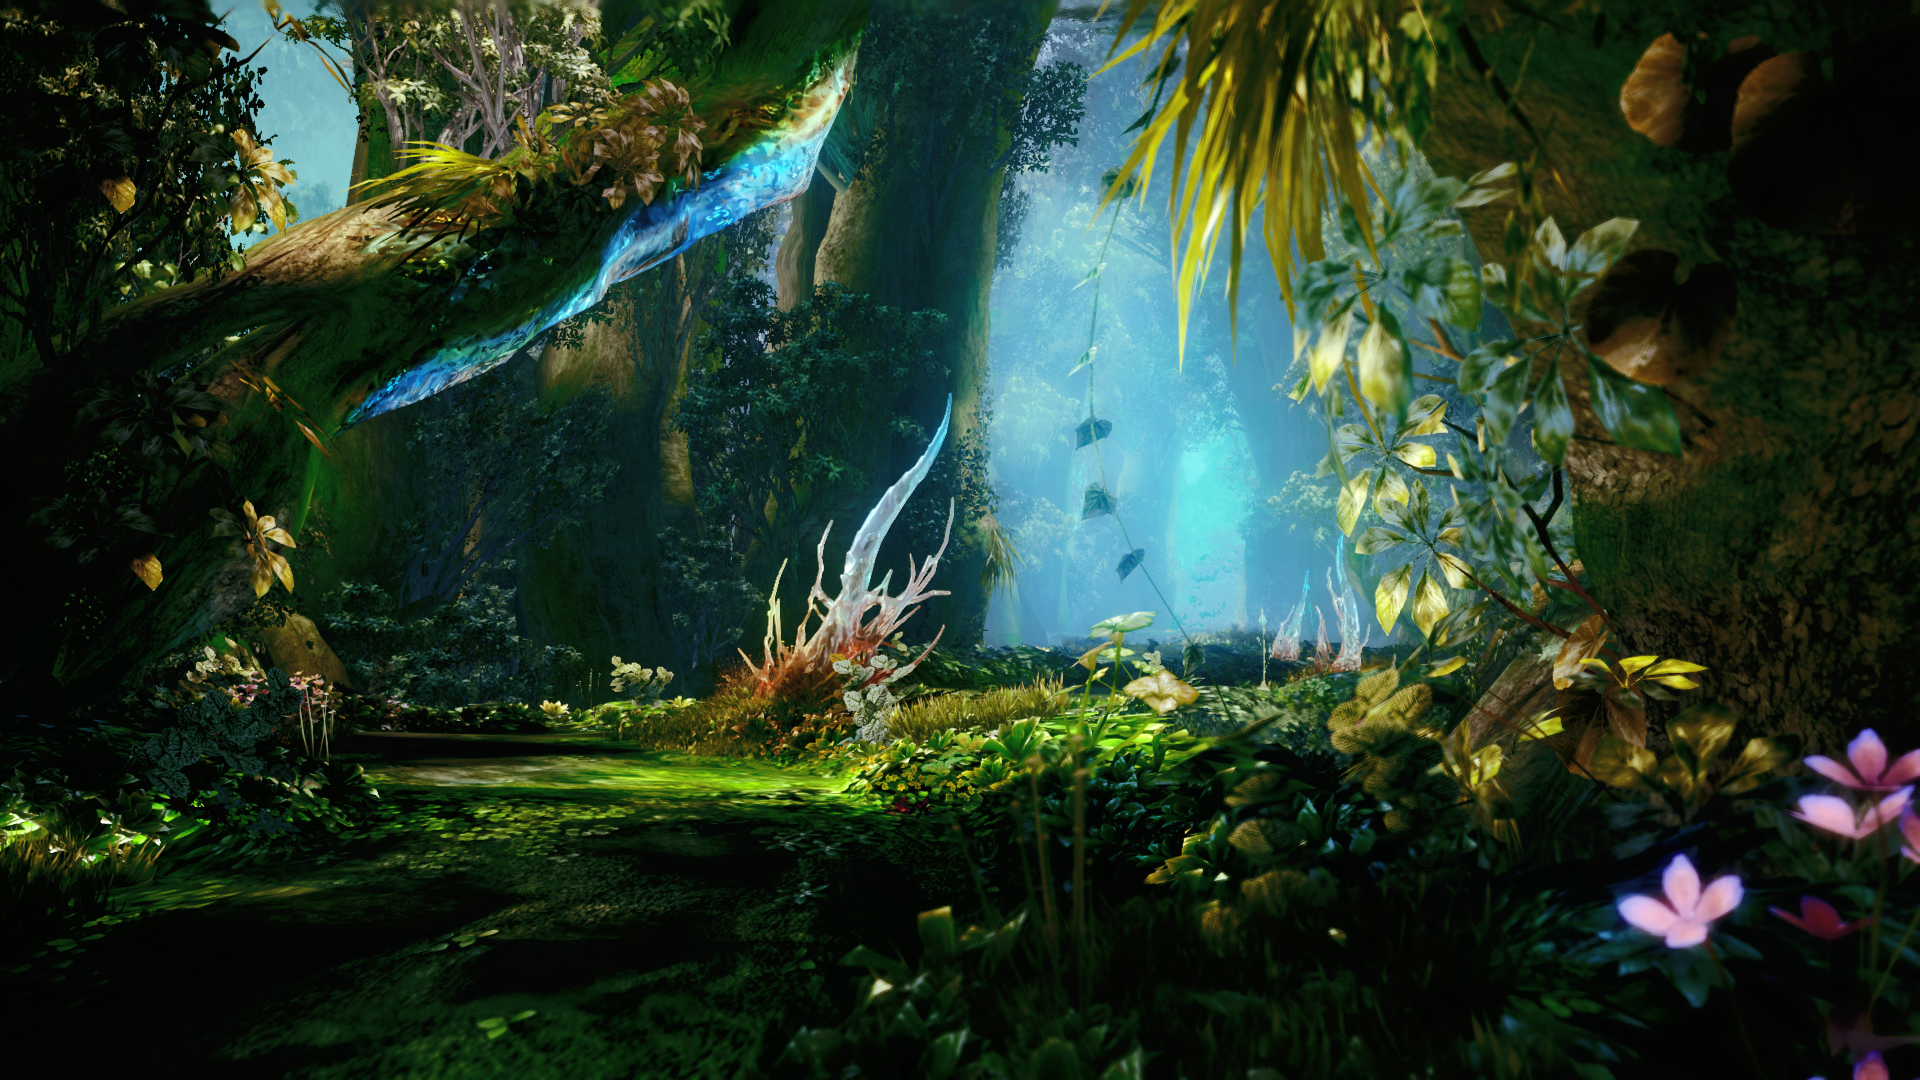 General 1920x1080 video games Final Fantasy XIII forest screen shot Final Fantasy plants nature